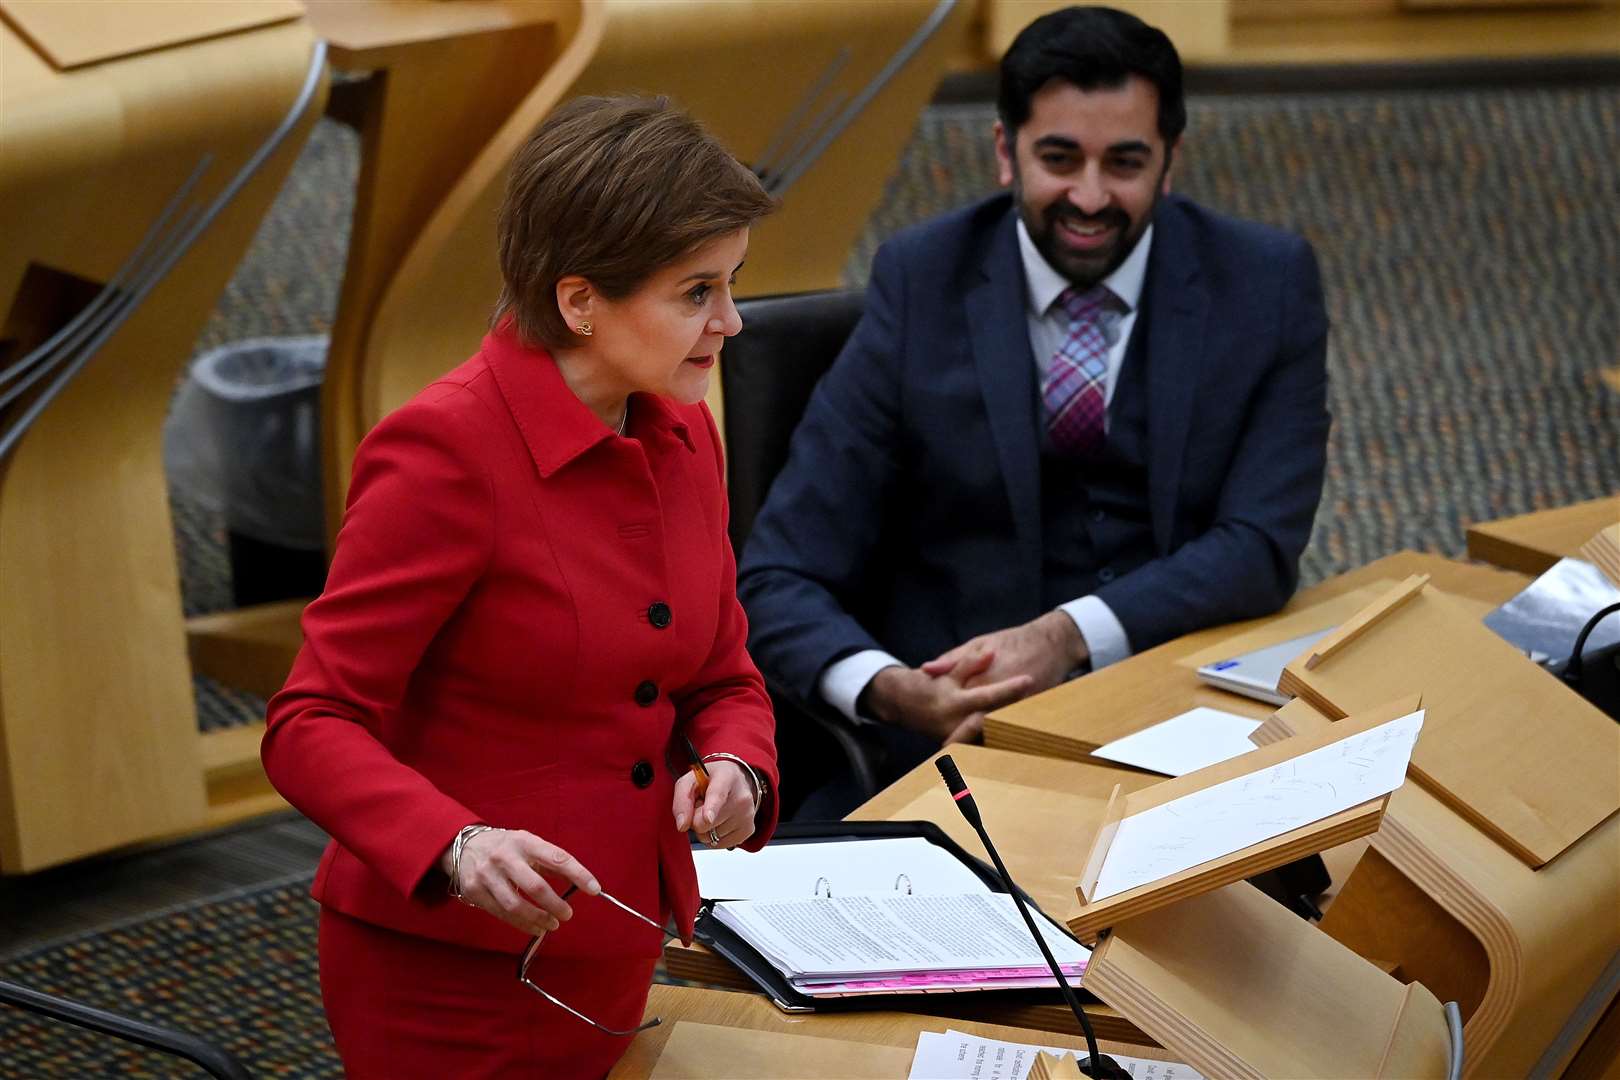 Humza Yousaf takes over from Nicola Sturgeon as SNP leader (Jeff J Mitchell/PA)